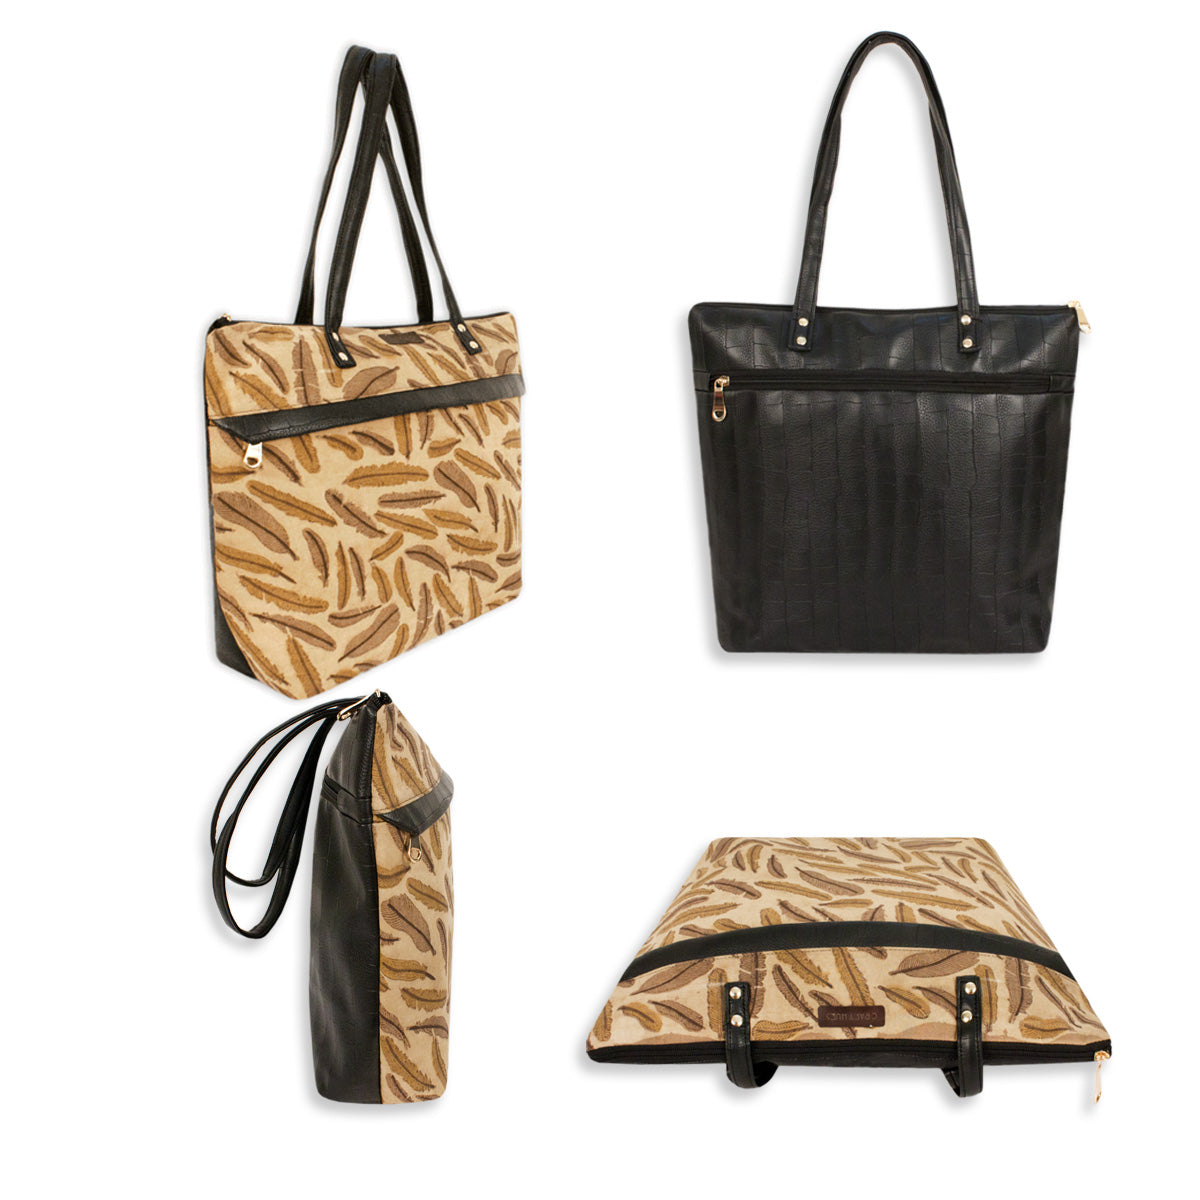 Feathers Tote/Pouch Combo